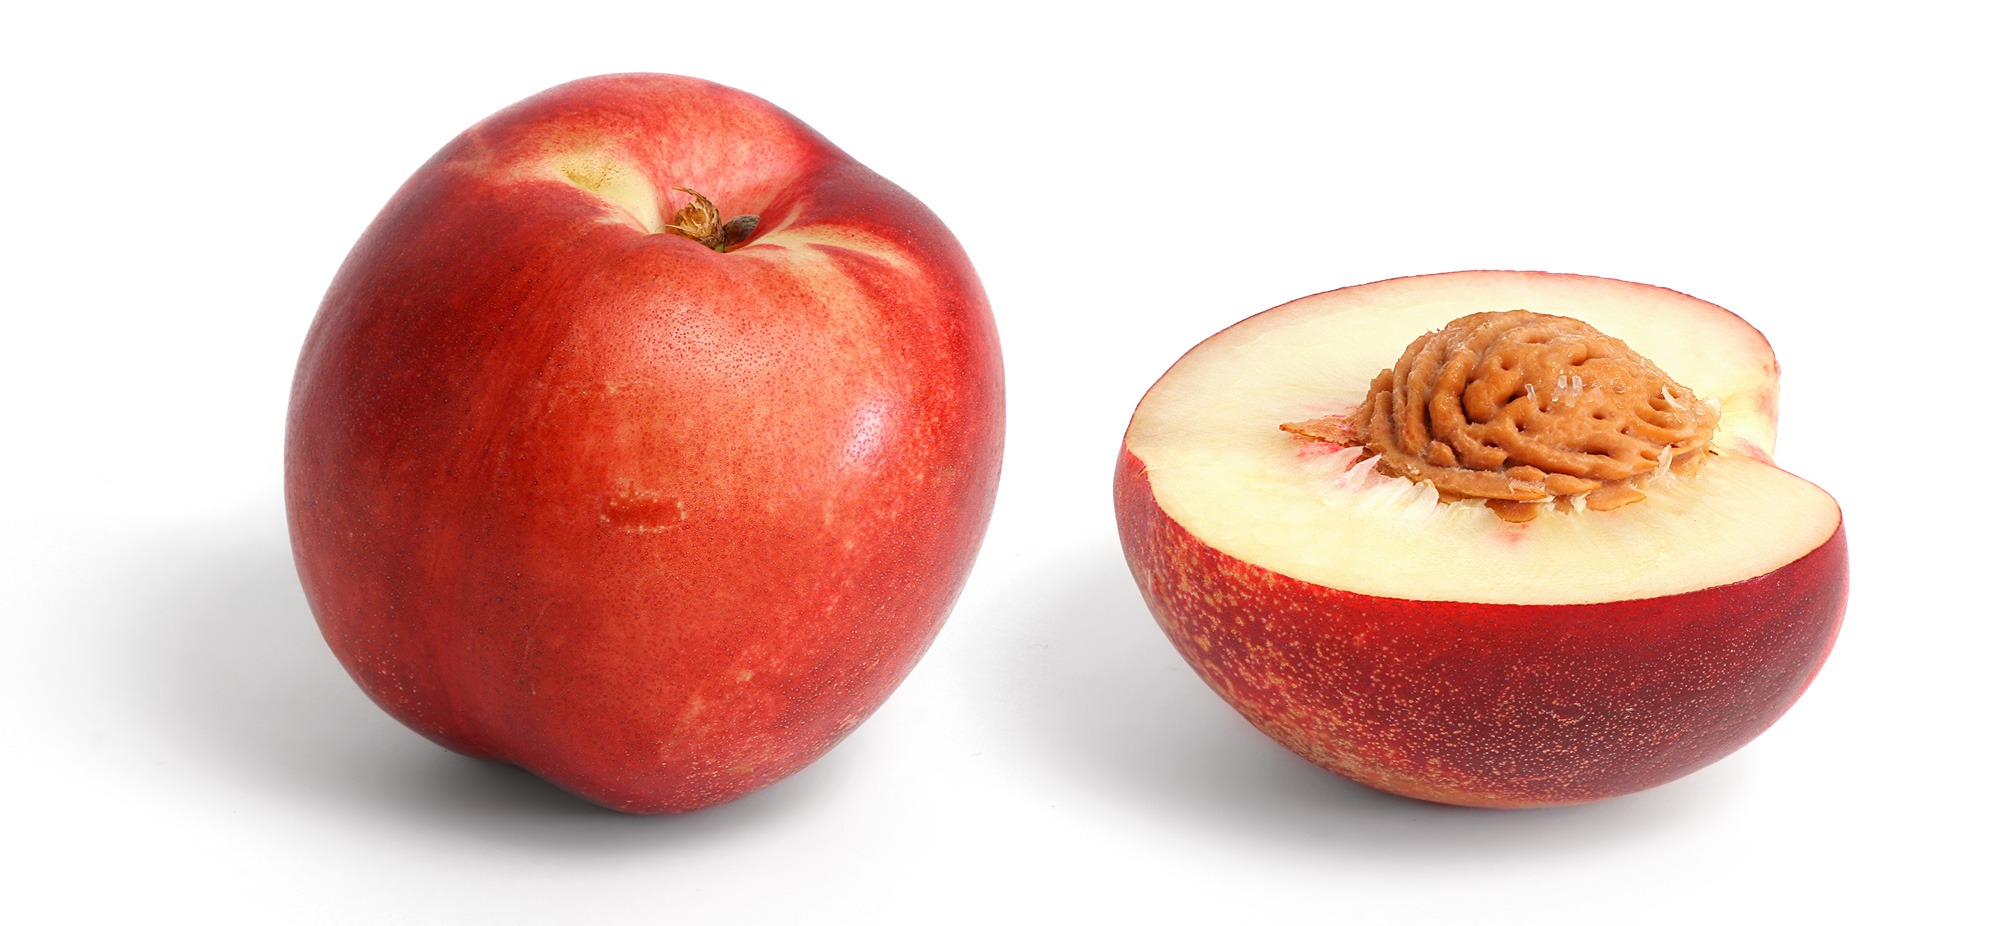 White nectarine and cross section